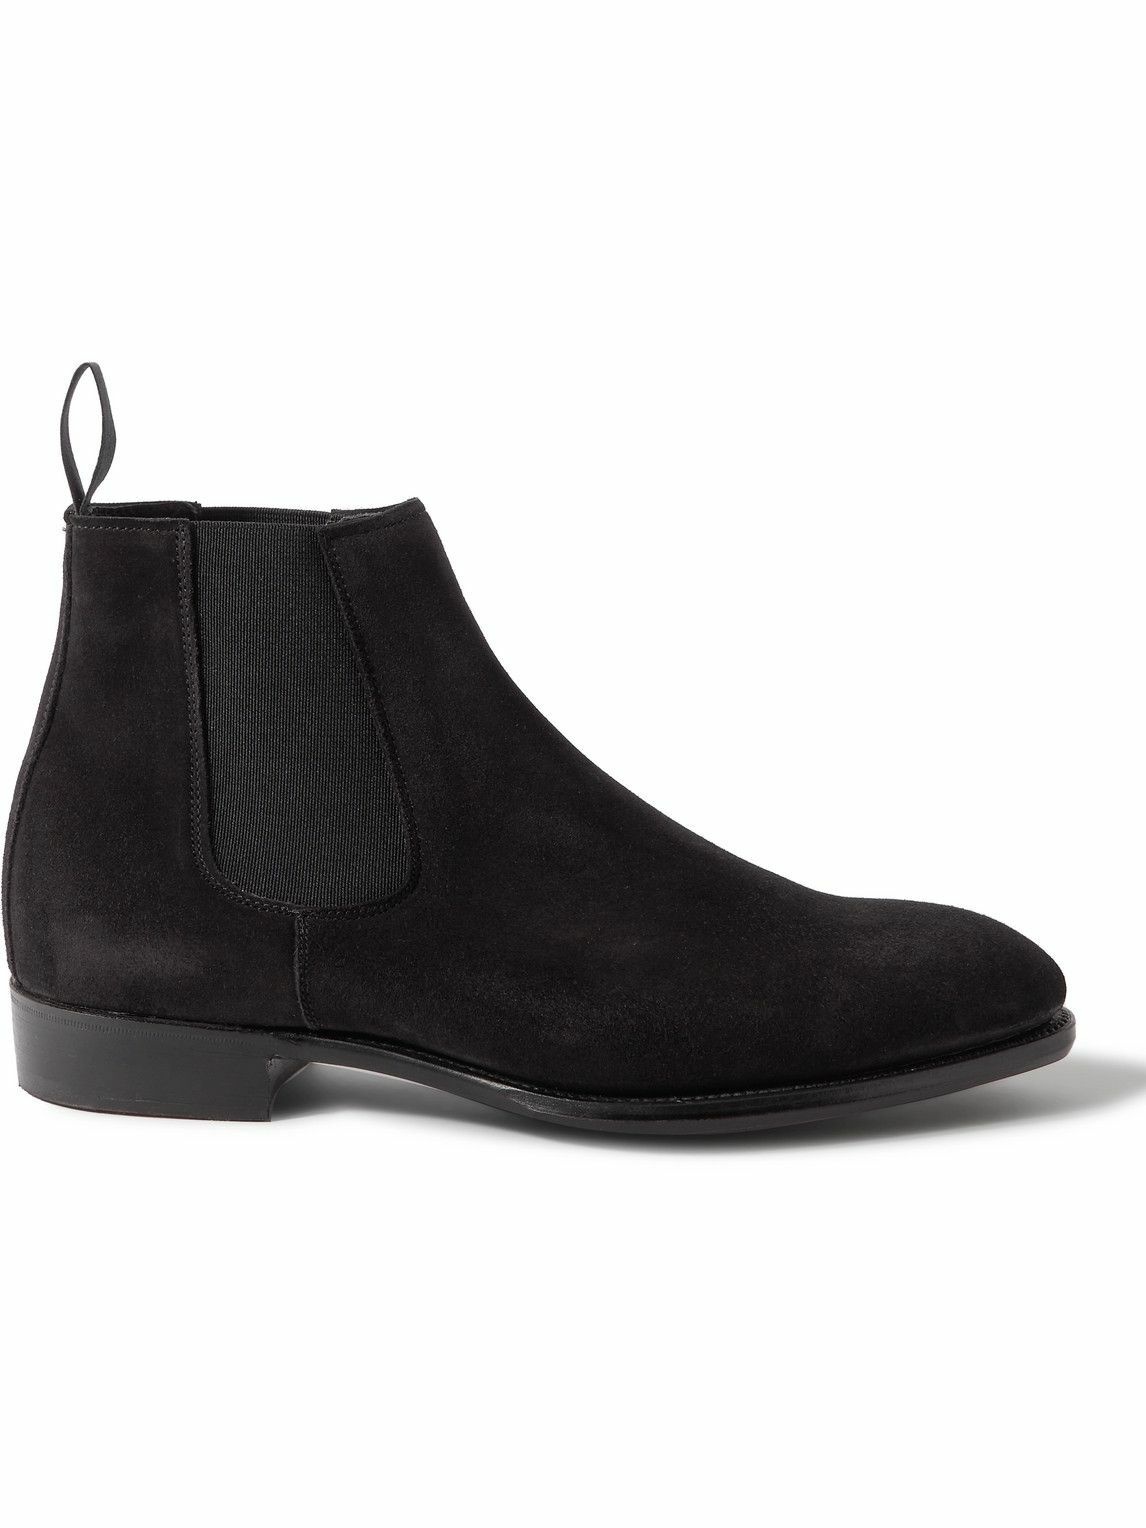 Photo: George Cleverley - Jason Suede Chelsea Boots - Black